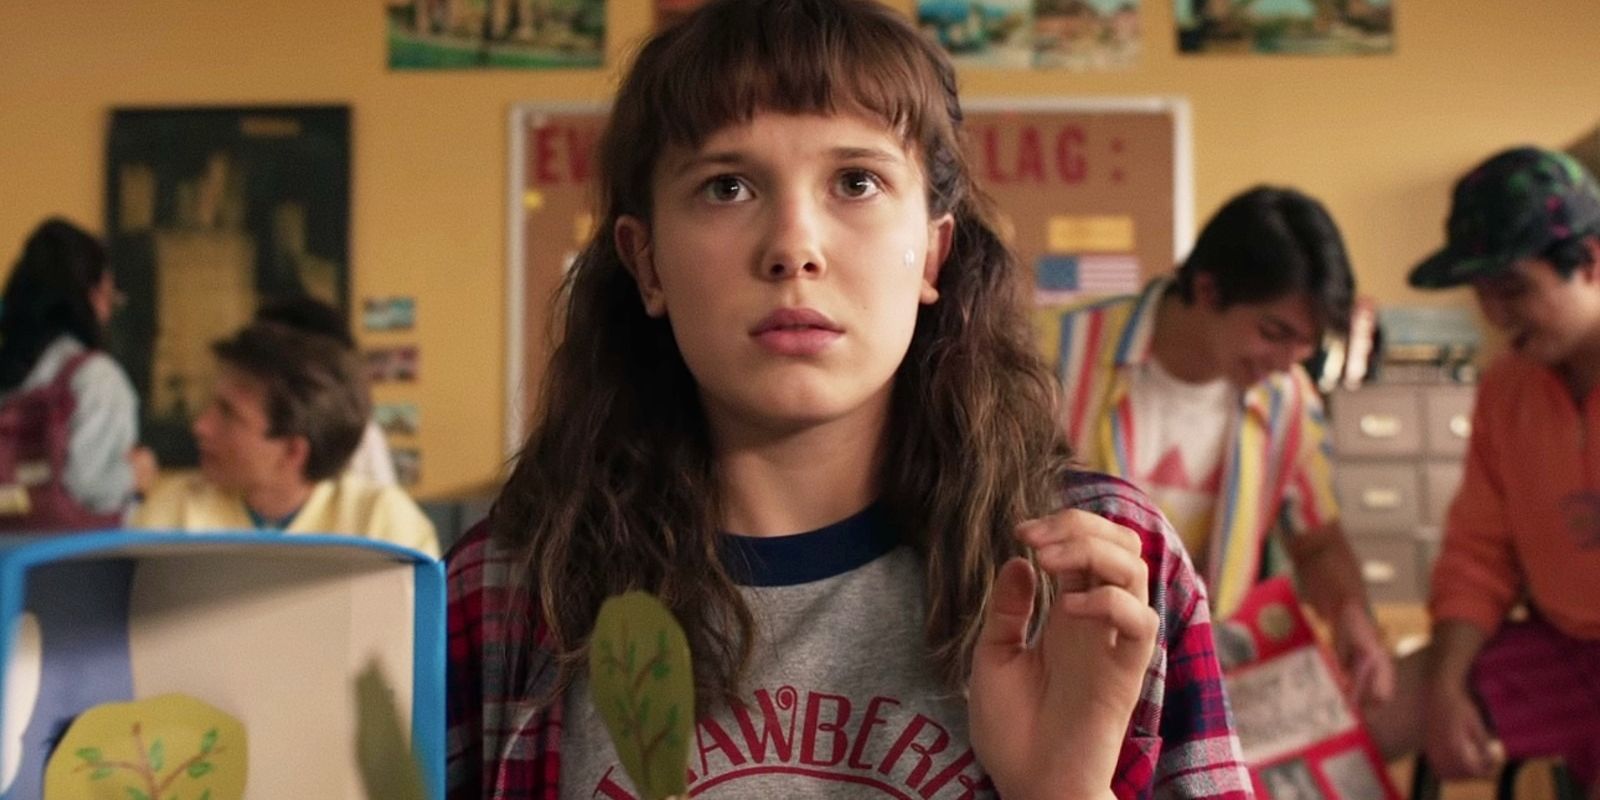 Eleven gets ready for diorama presentation in Stranger Things 4